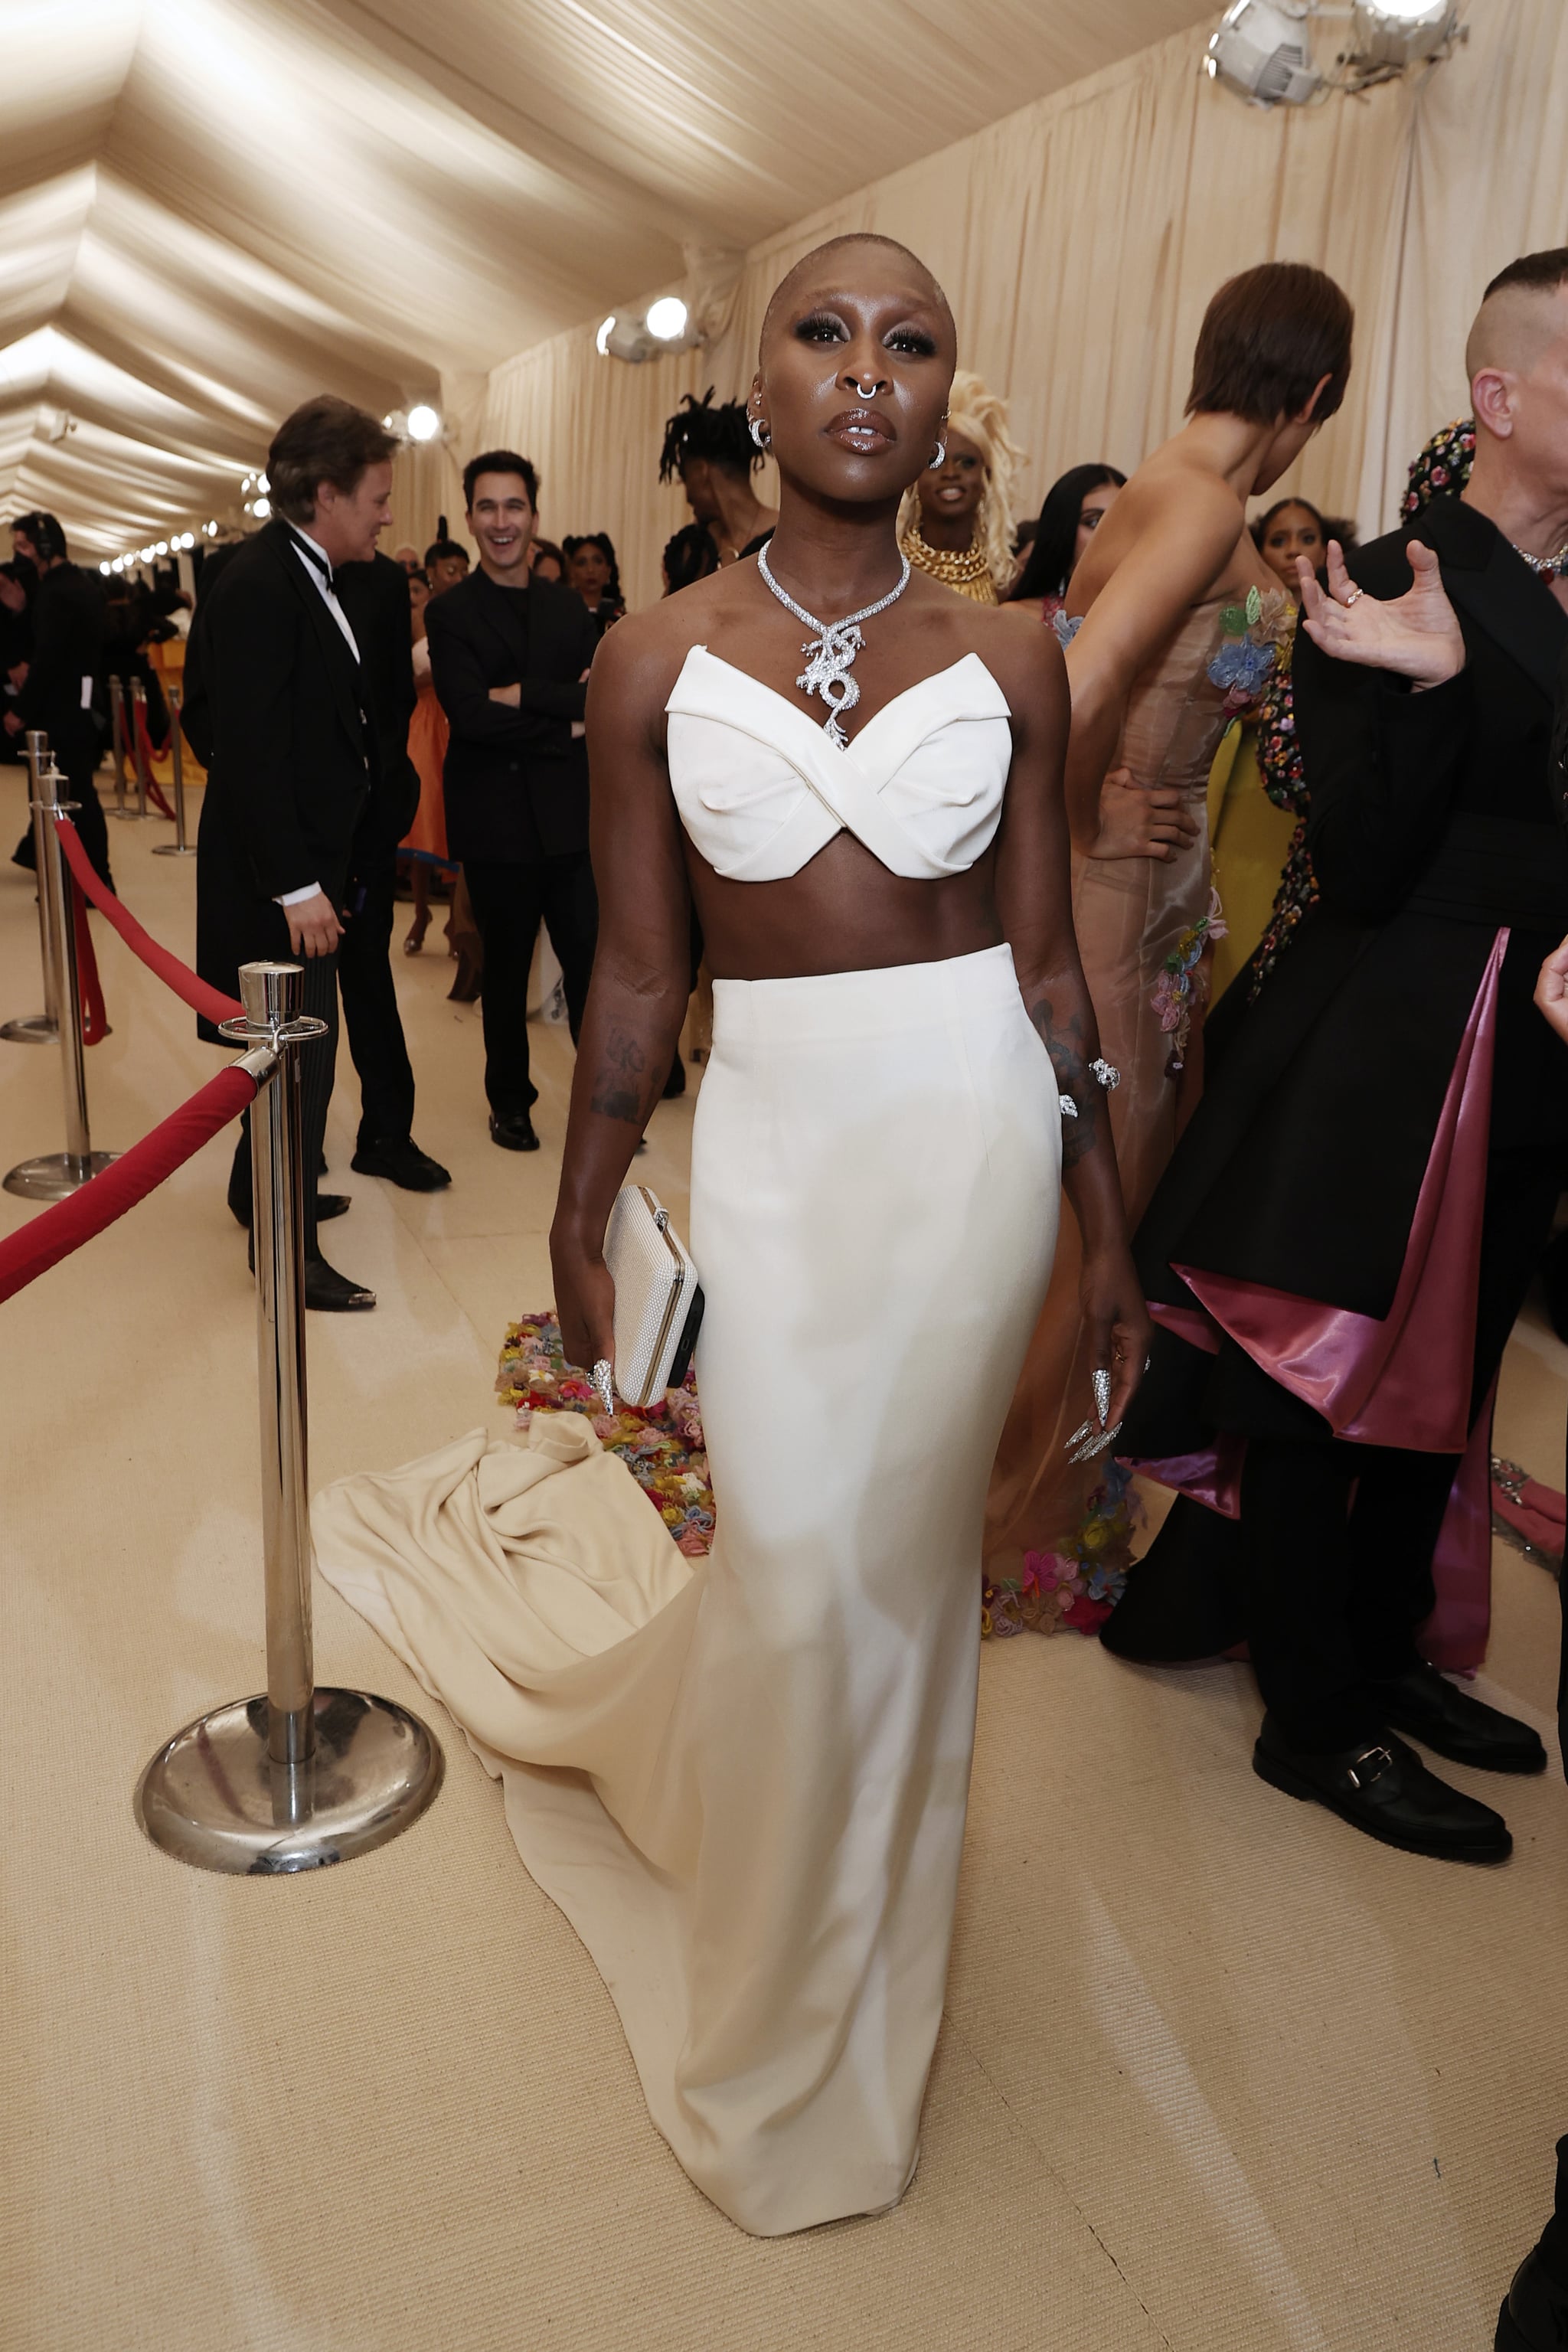 Cynthia Erivo, Every Look at the 2018 Met Gala Was Bold Enough to Leave an  Impression